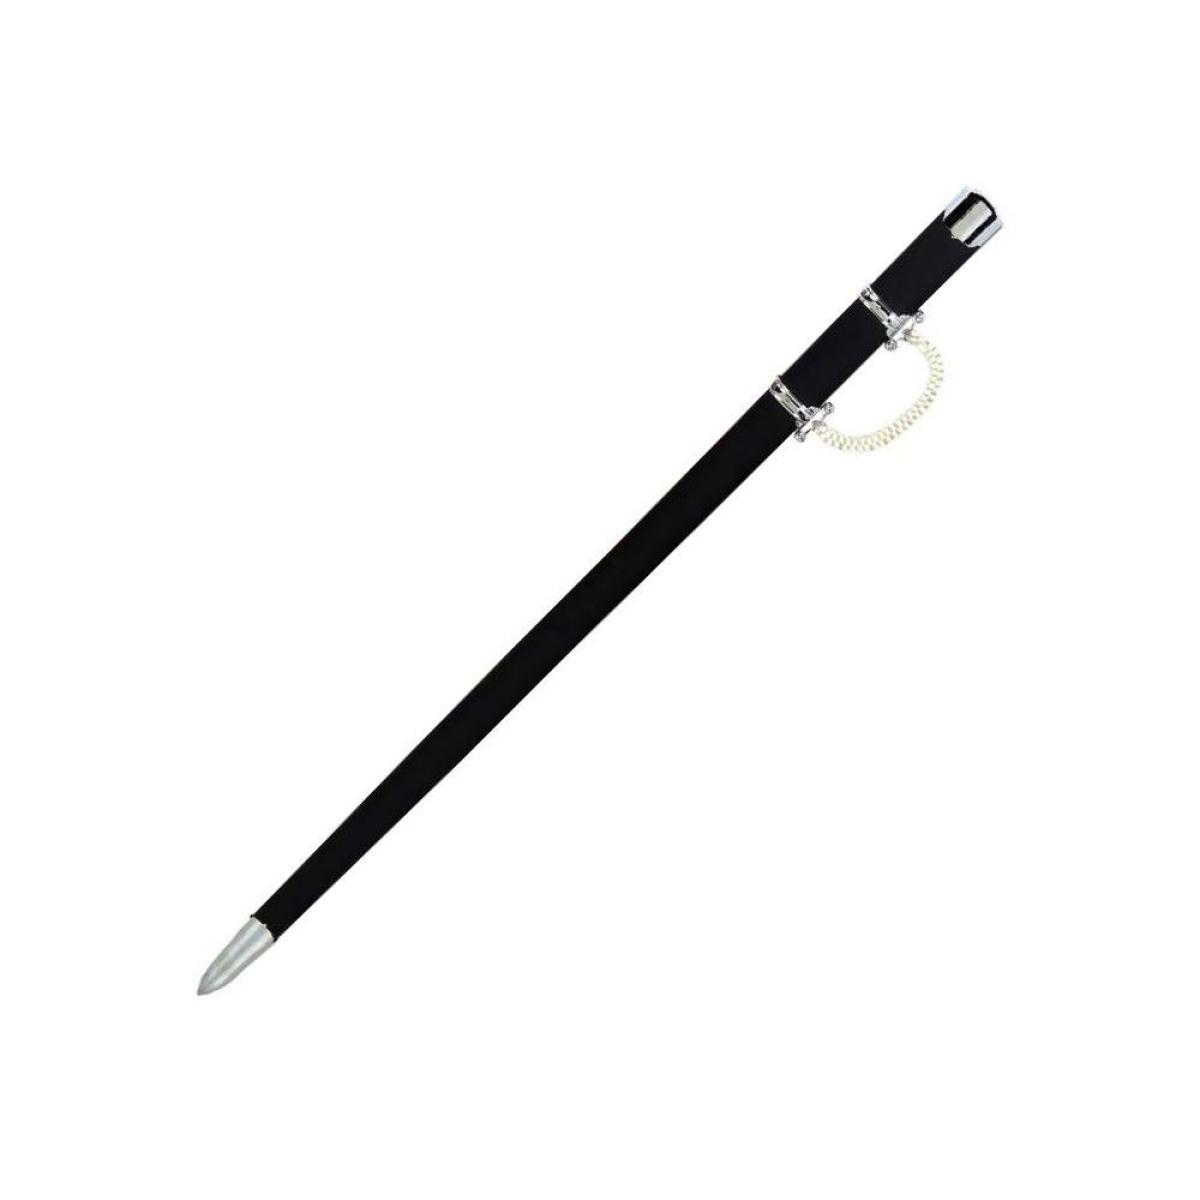 Beginners Tai Chi sword with steel blade ♥ with black lacquered sword sheath✅ Exercise weapon for your Tai Chi training✅ Weapons for Tai Chi✓ Tai Chi Chuan✓ Taichi✓ buy cheap✓ order online now➽ www.bokken-welt.de